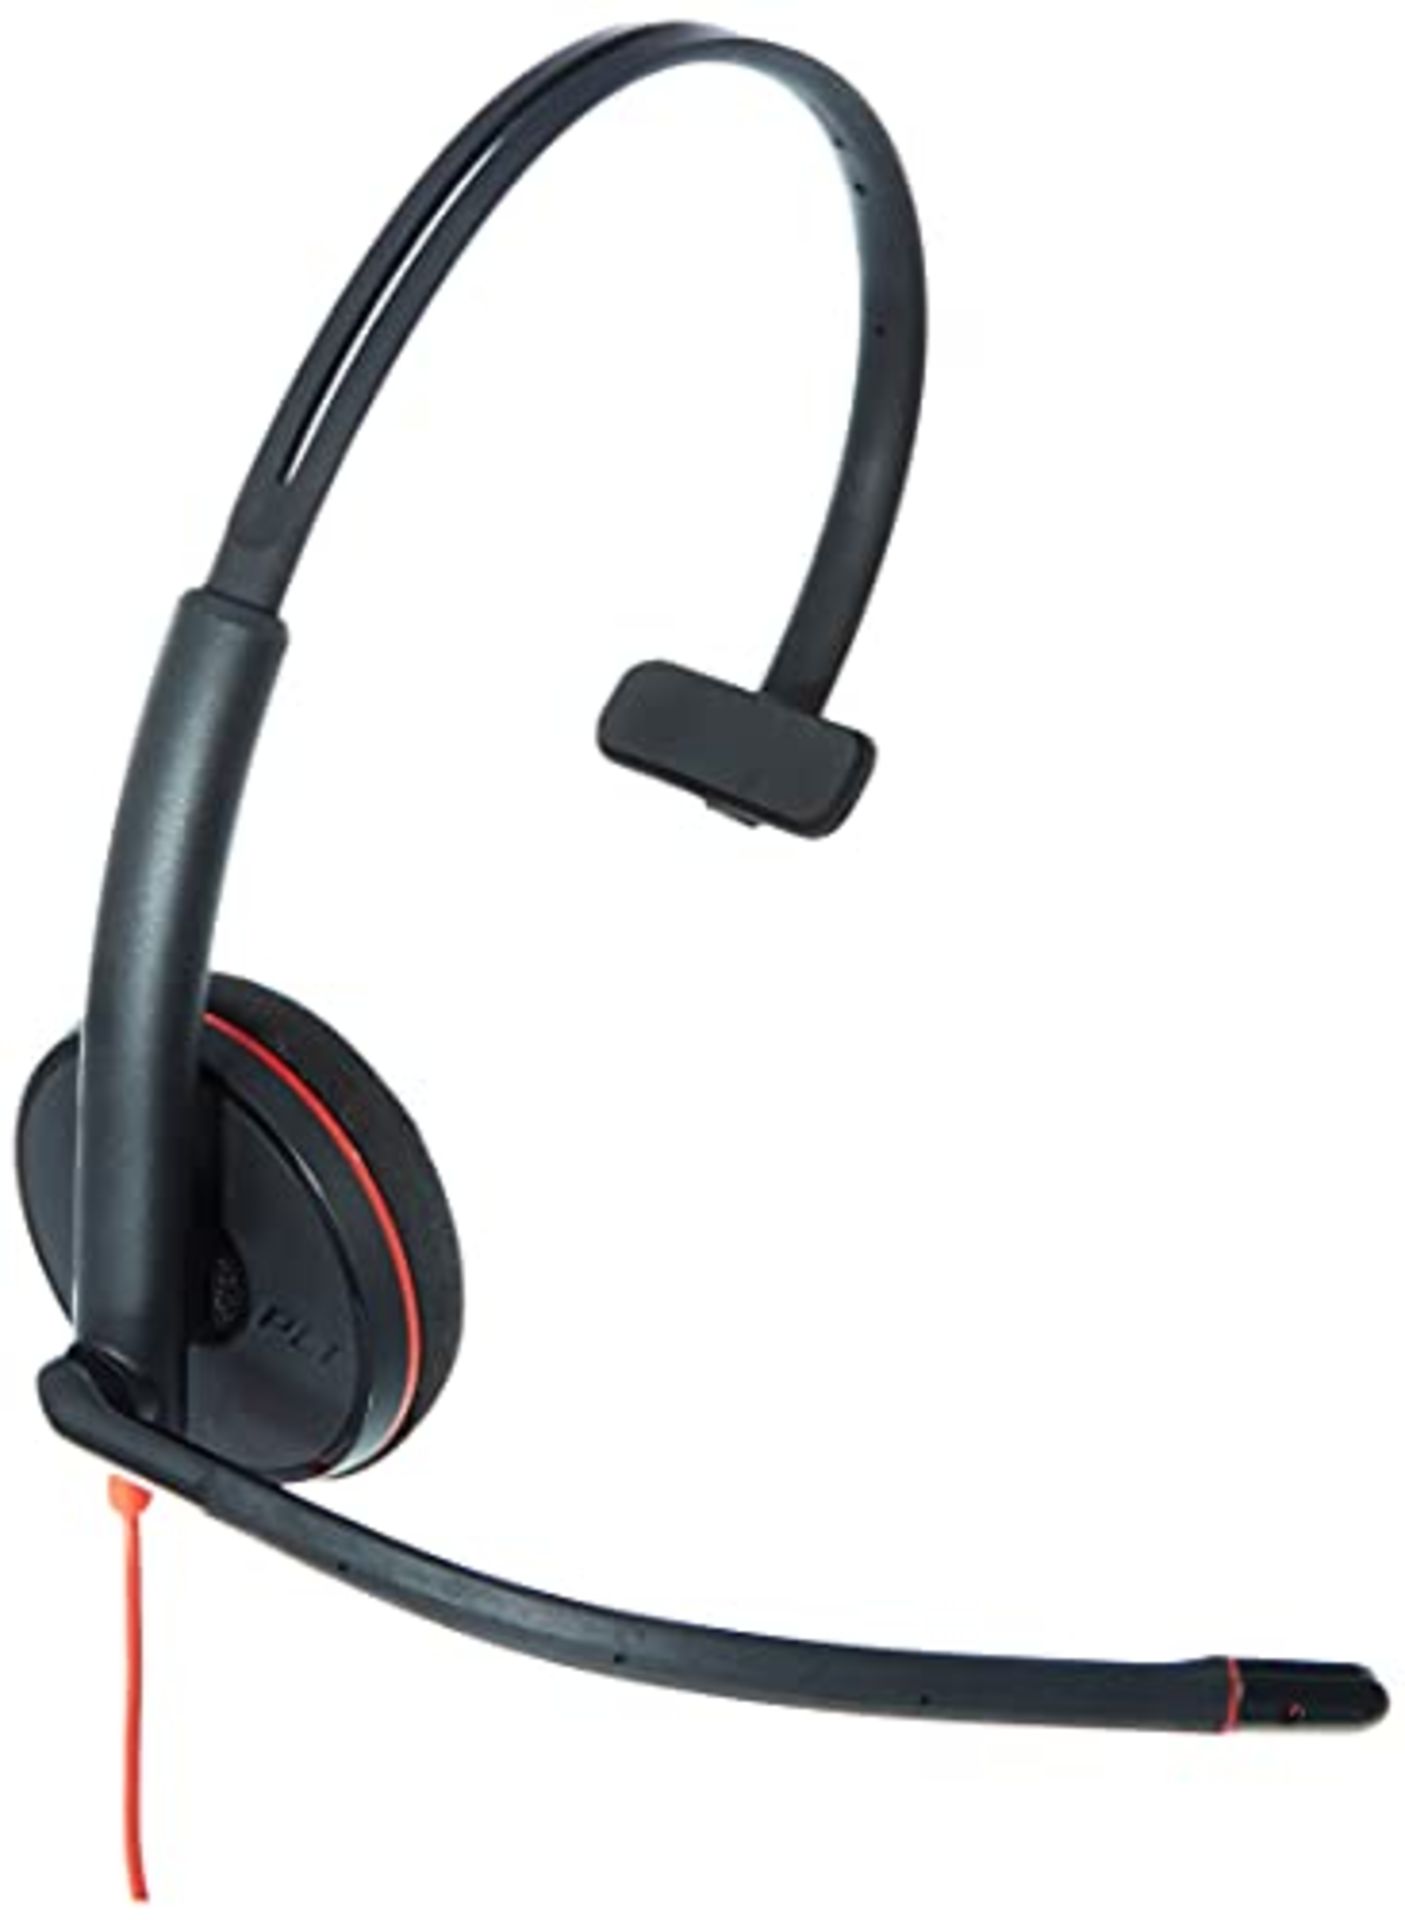 Plantronics - Blackwire 3210 - Wired Single-Ear (Mono) Headset with Boom Mic - USB-C t